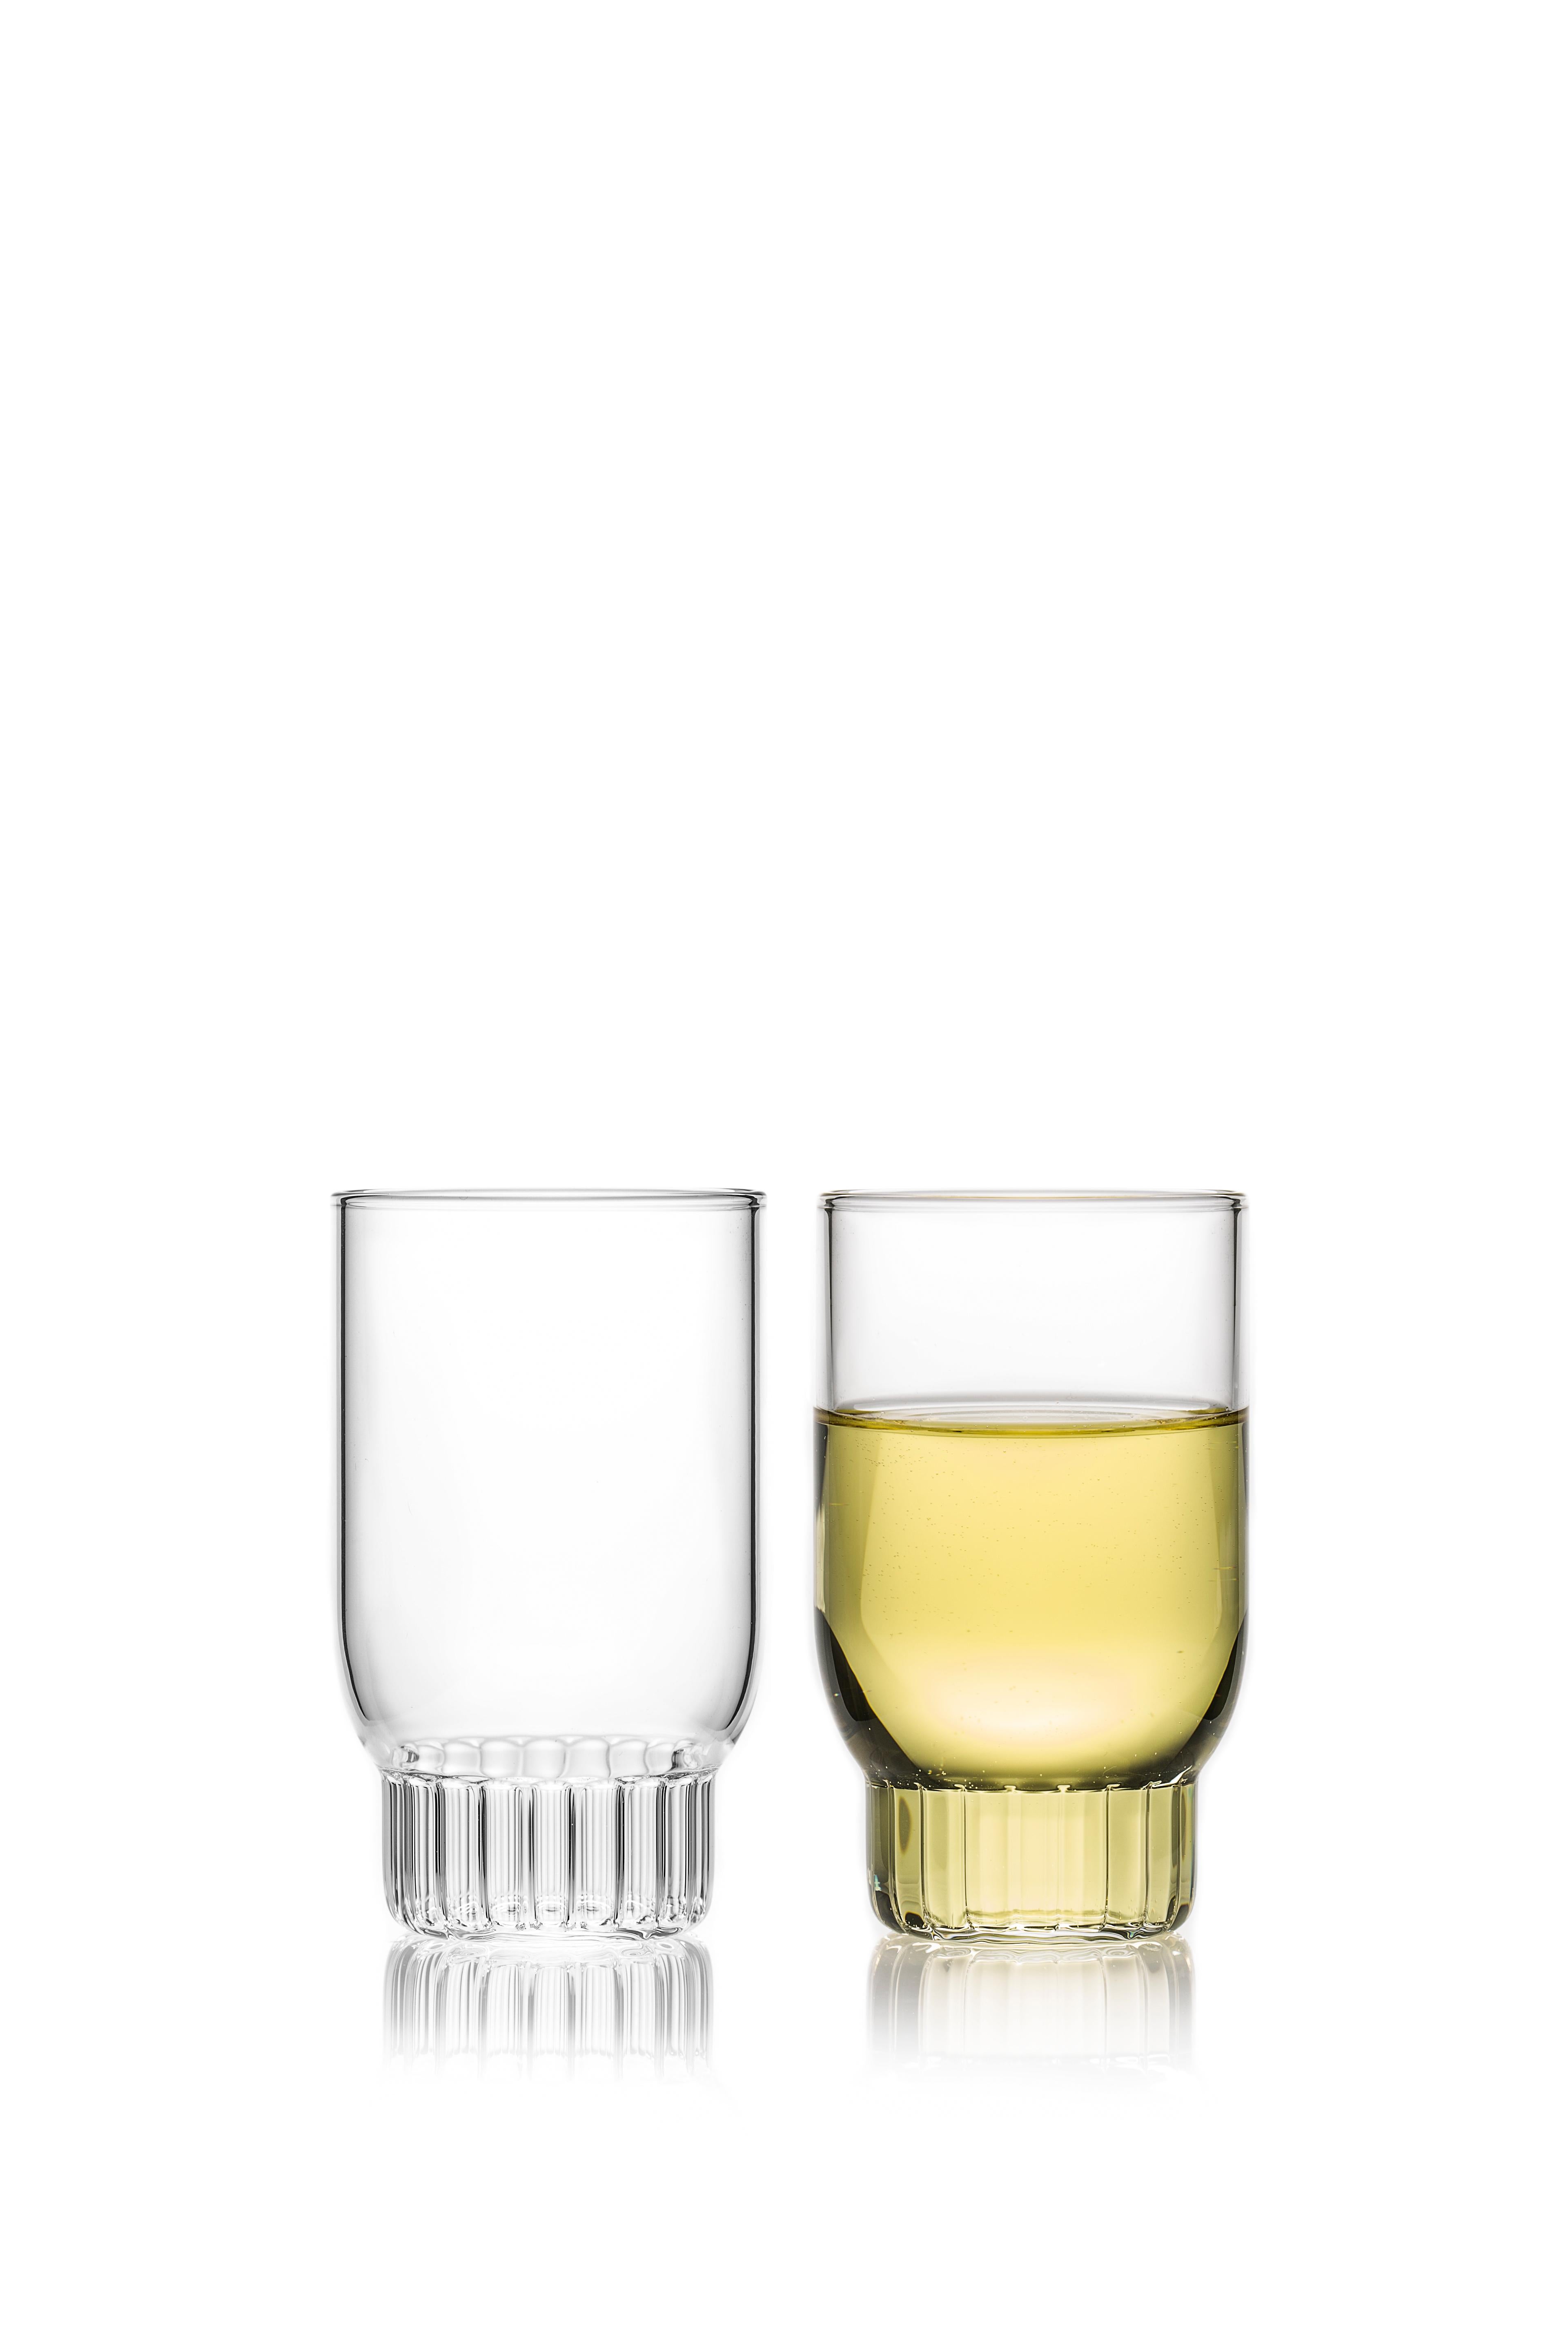 Rasori small glasses, set of two

As the designer's favourite street in Milan, her home away from home, the clear Czech contemporary Rasori Small glasses are a playful and delicate combination of materials and form, just like the city itself. A